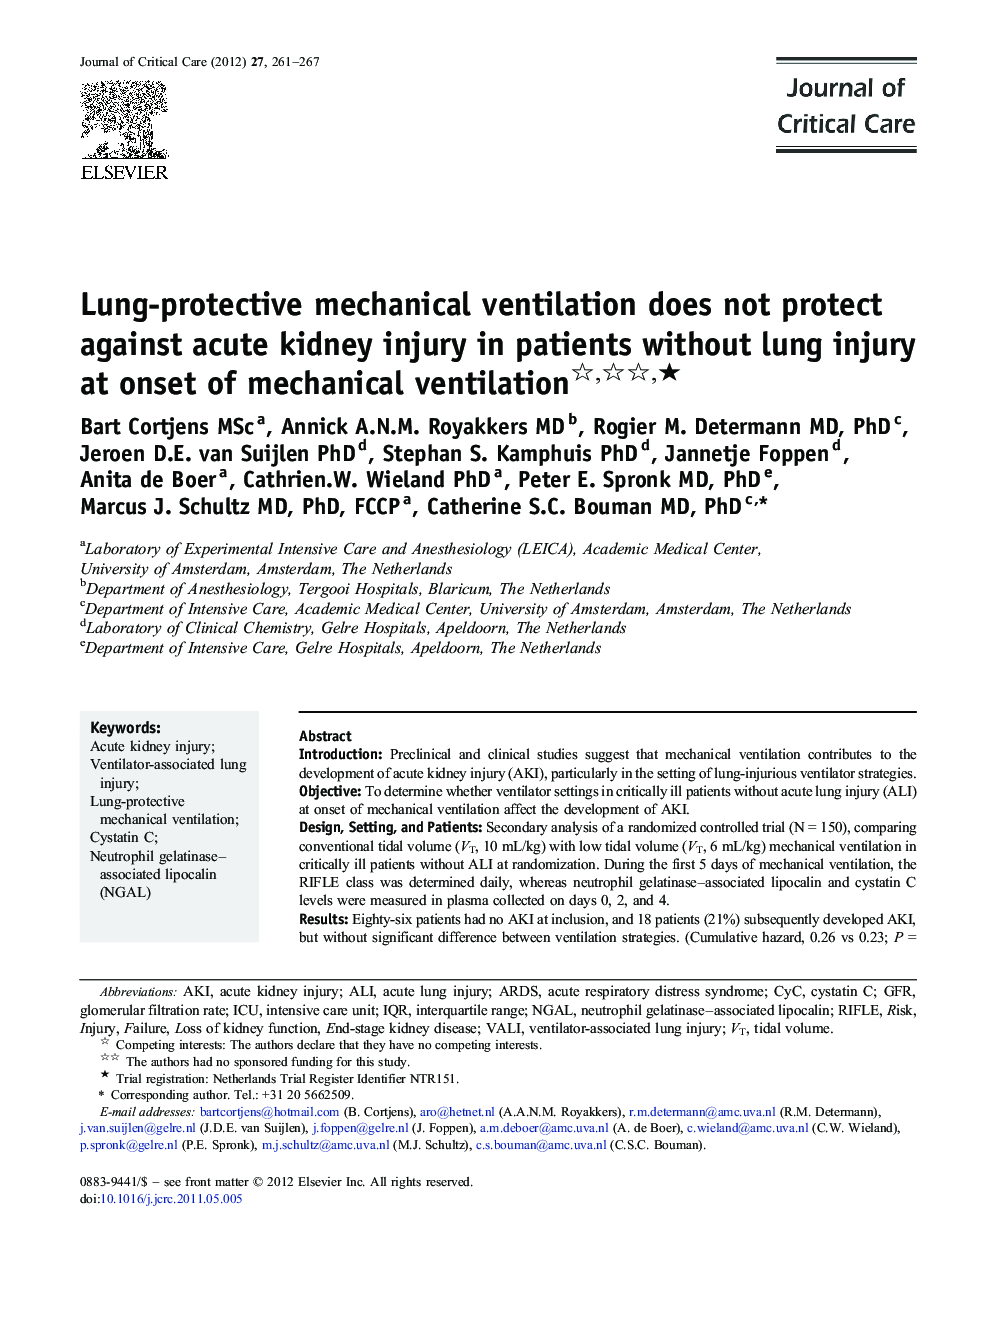 RenalLung-protective mechanical ventilation does not protect against acute kidney injury in patients without lung injury at onset of mechanical ventilationâ